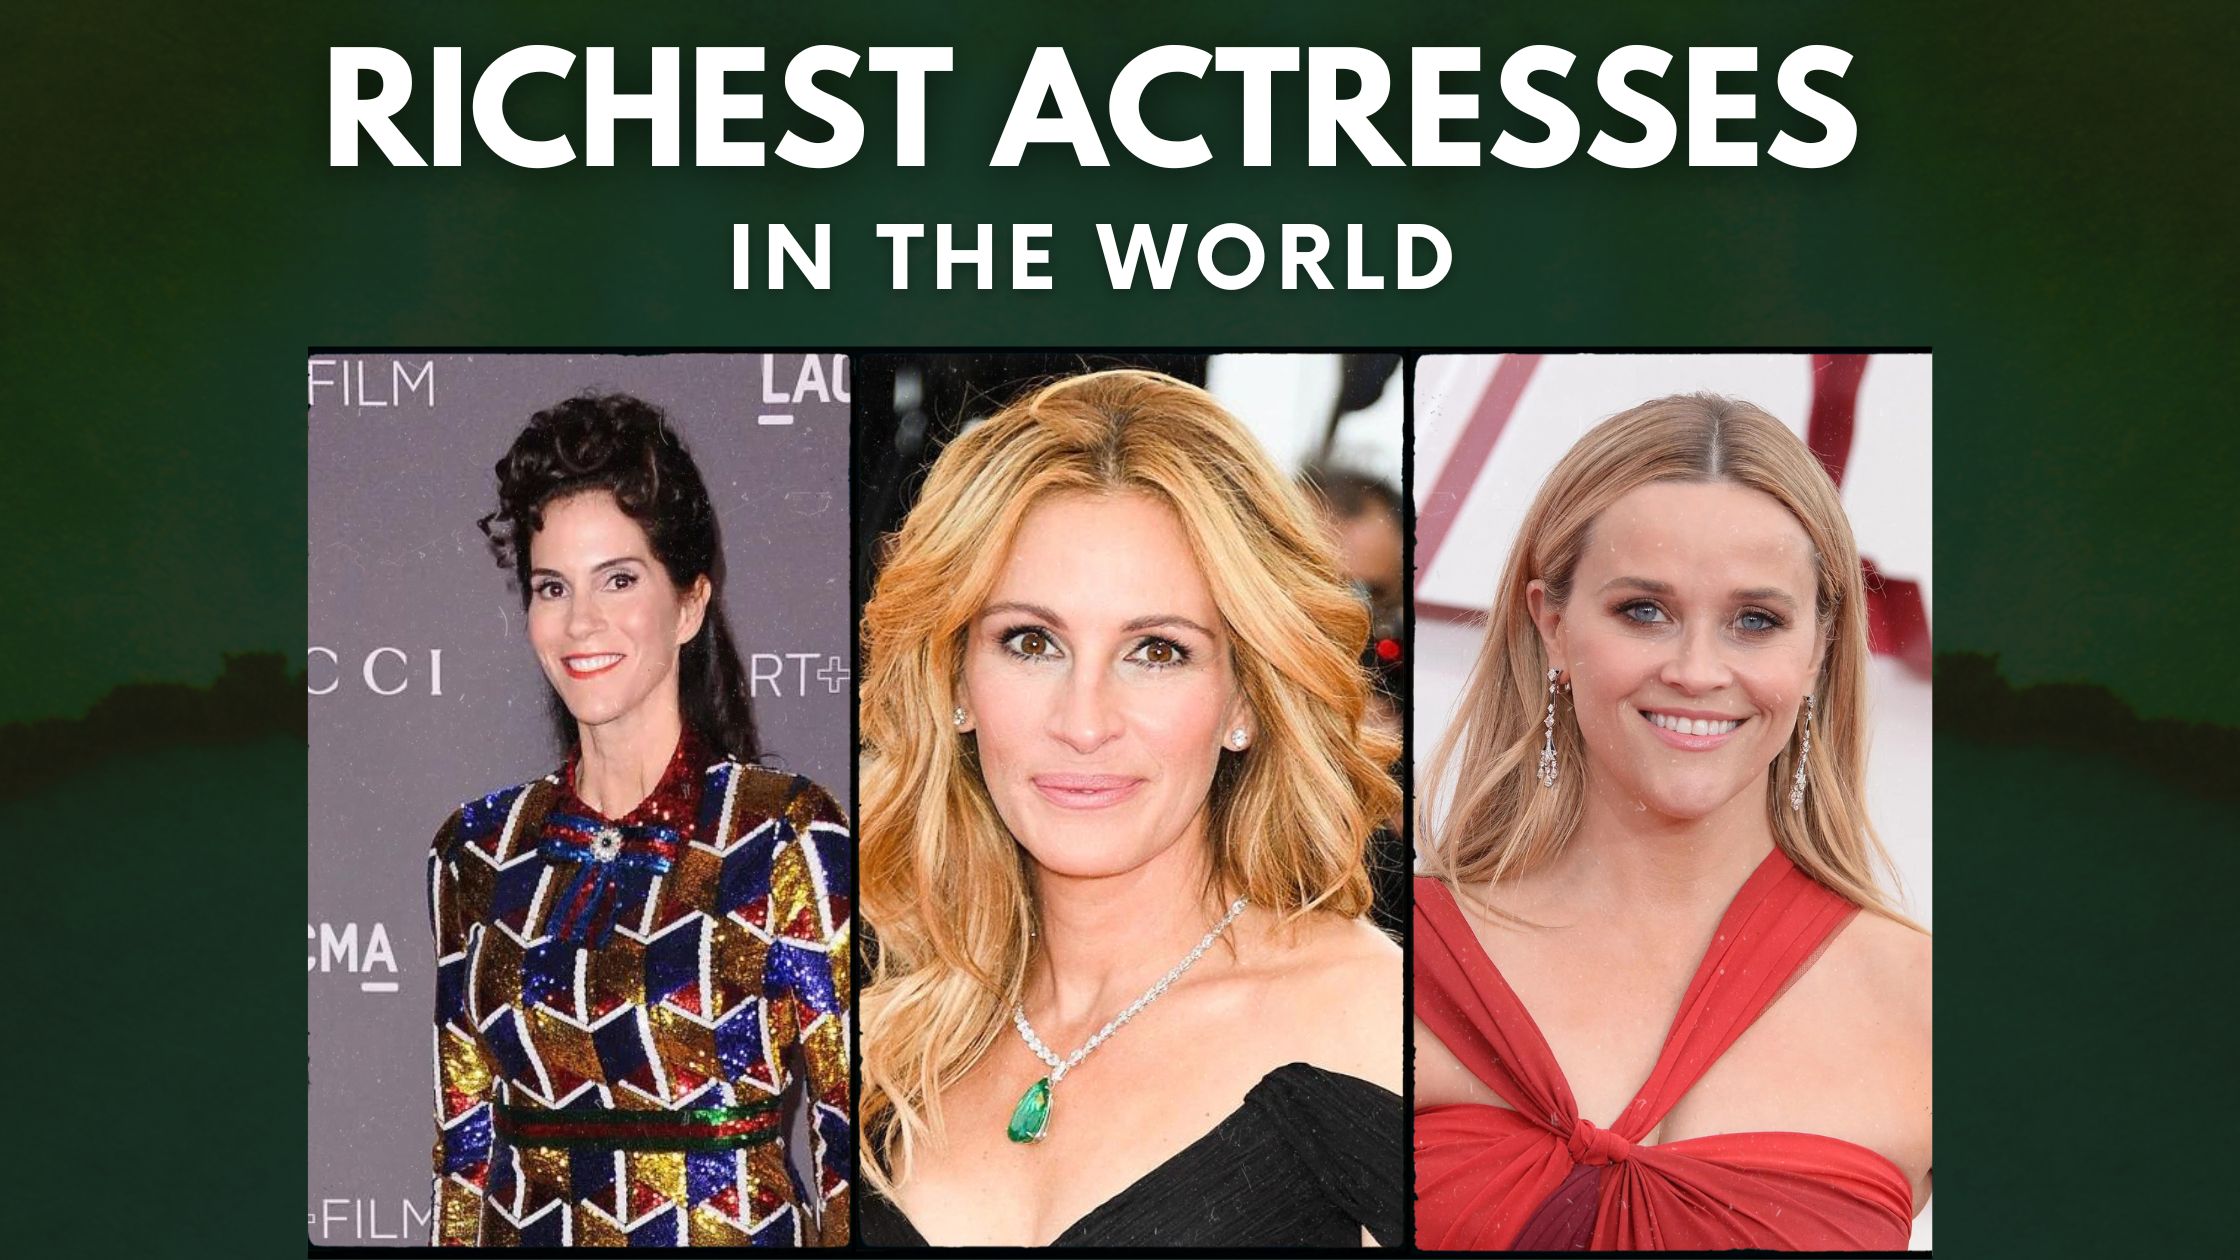 Top 10 Richest Actresses in the World